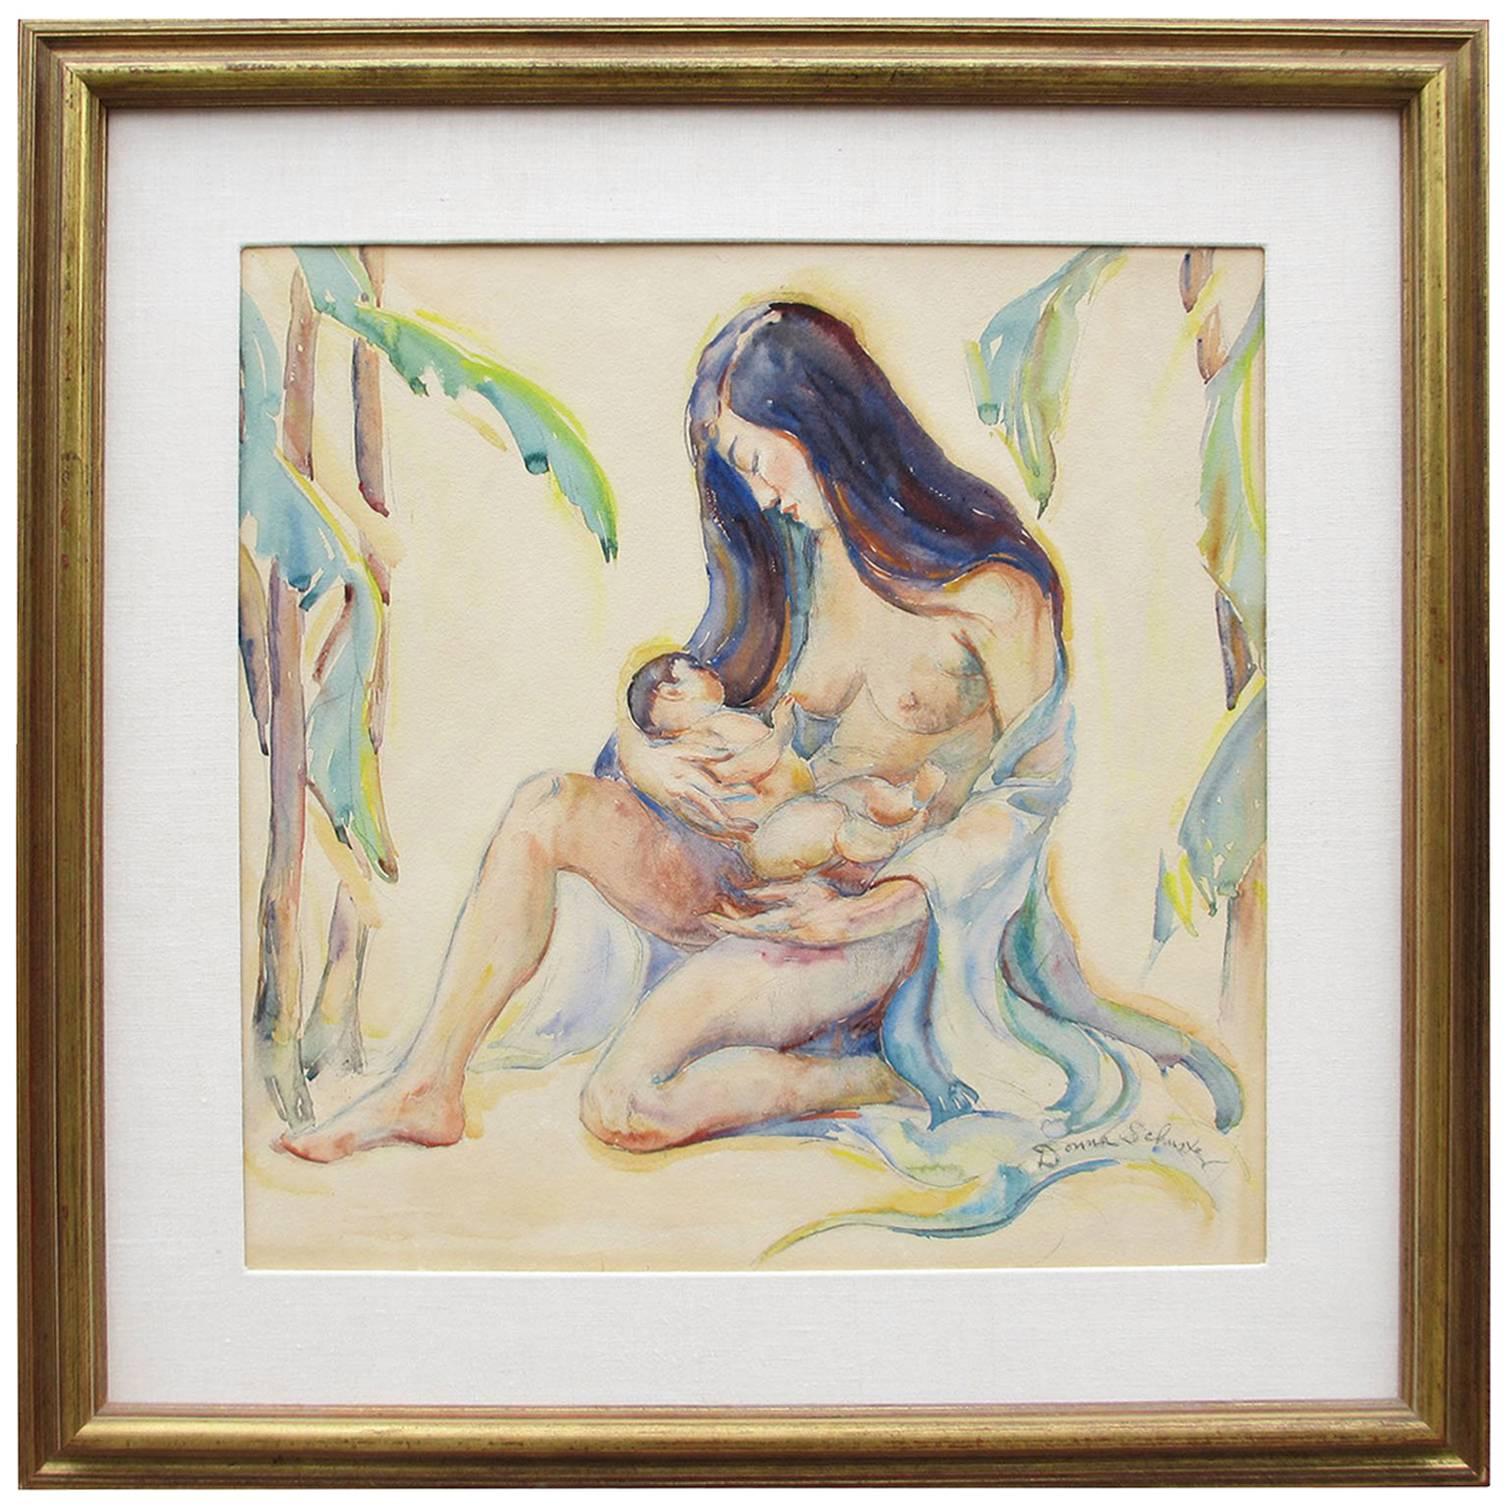 Donna Schuster “Mother and Child” Watercolor, Pencil and Gouache